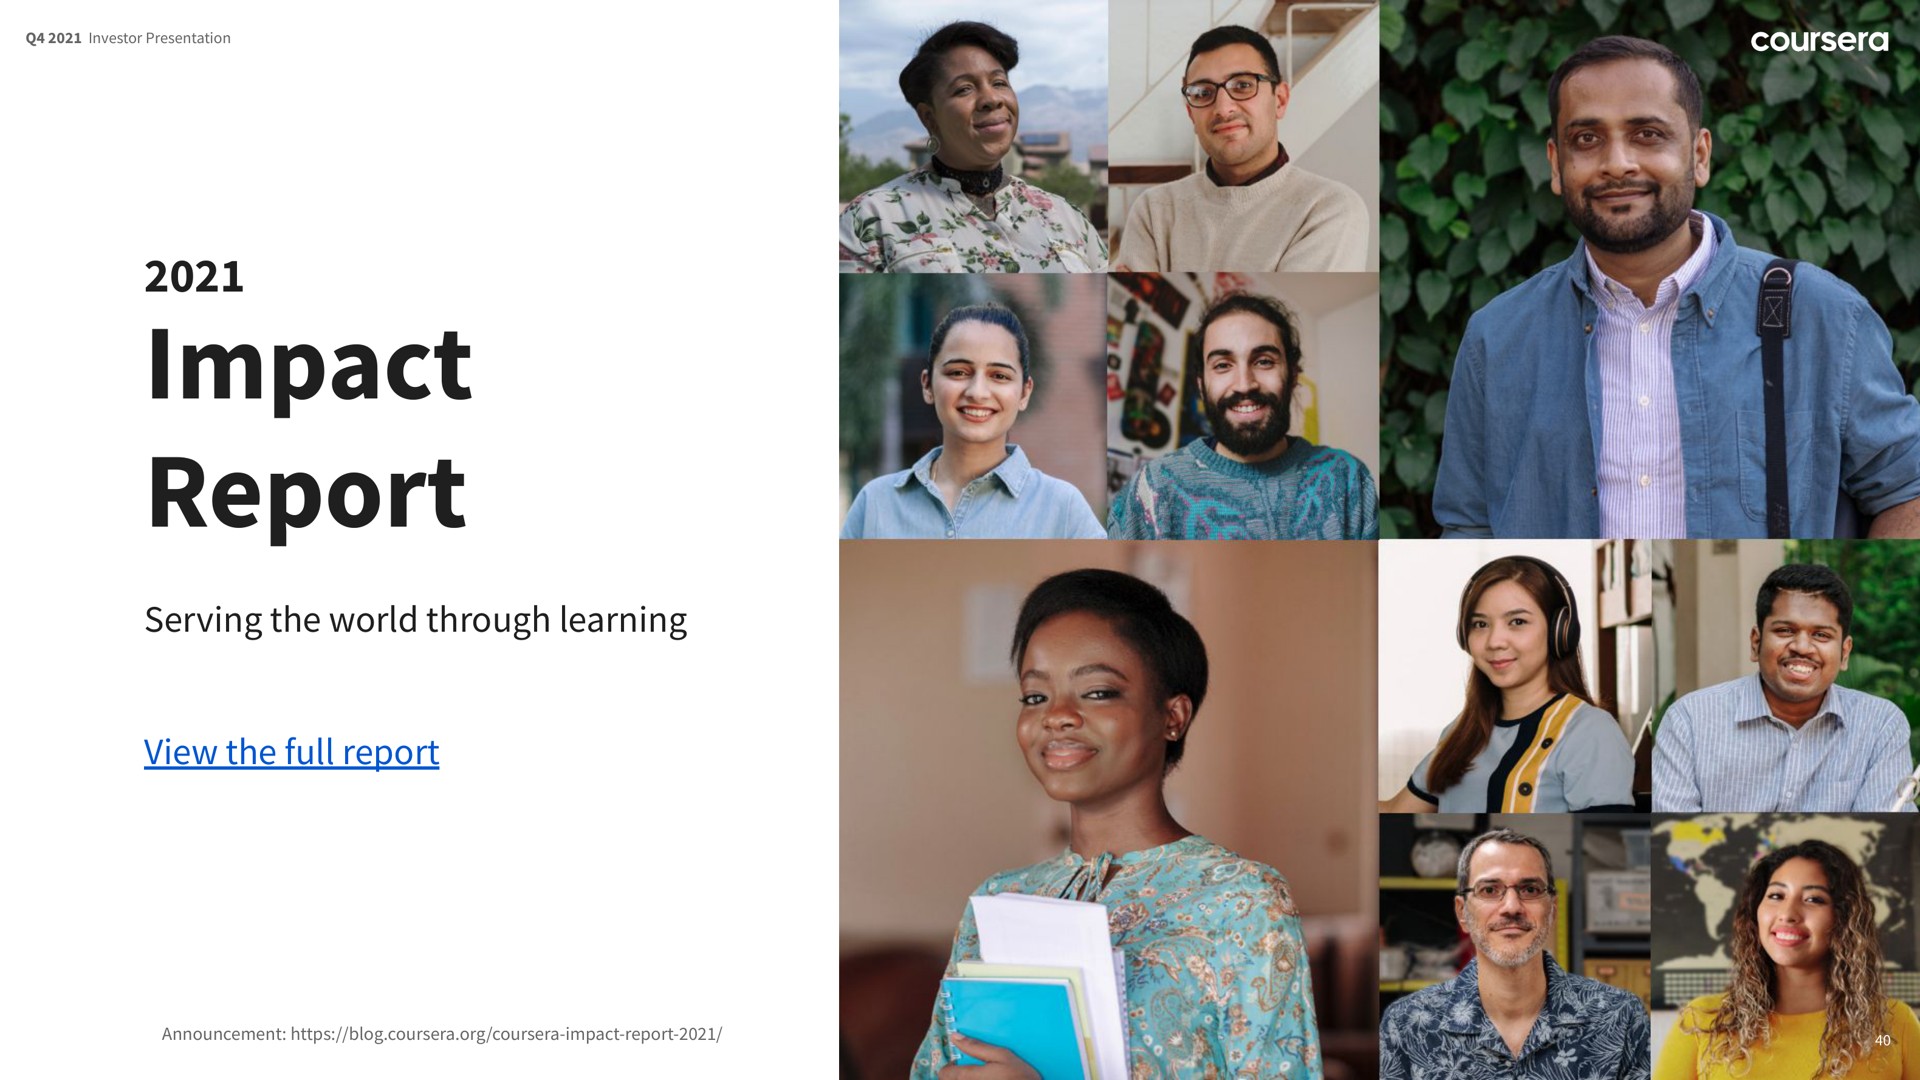 impact report serving the world through learning | Coursera